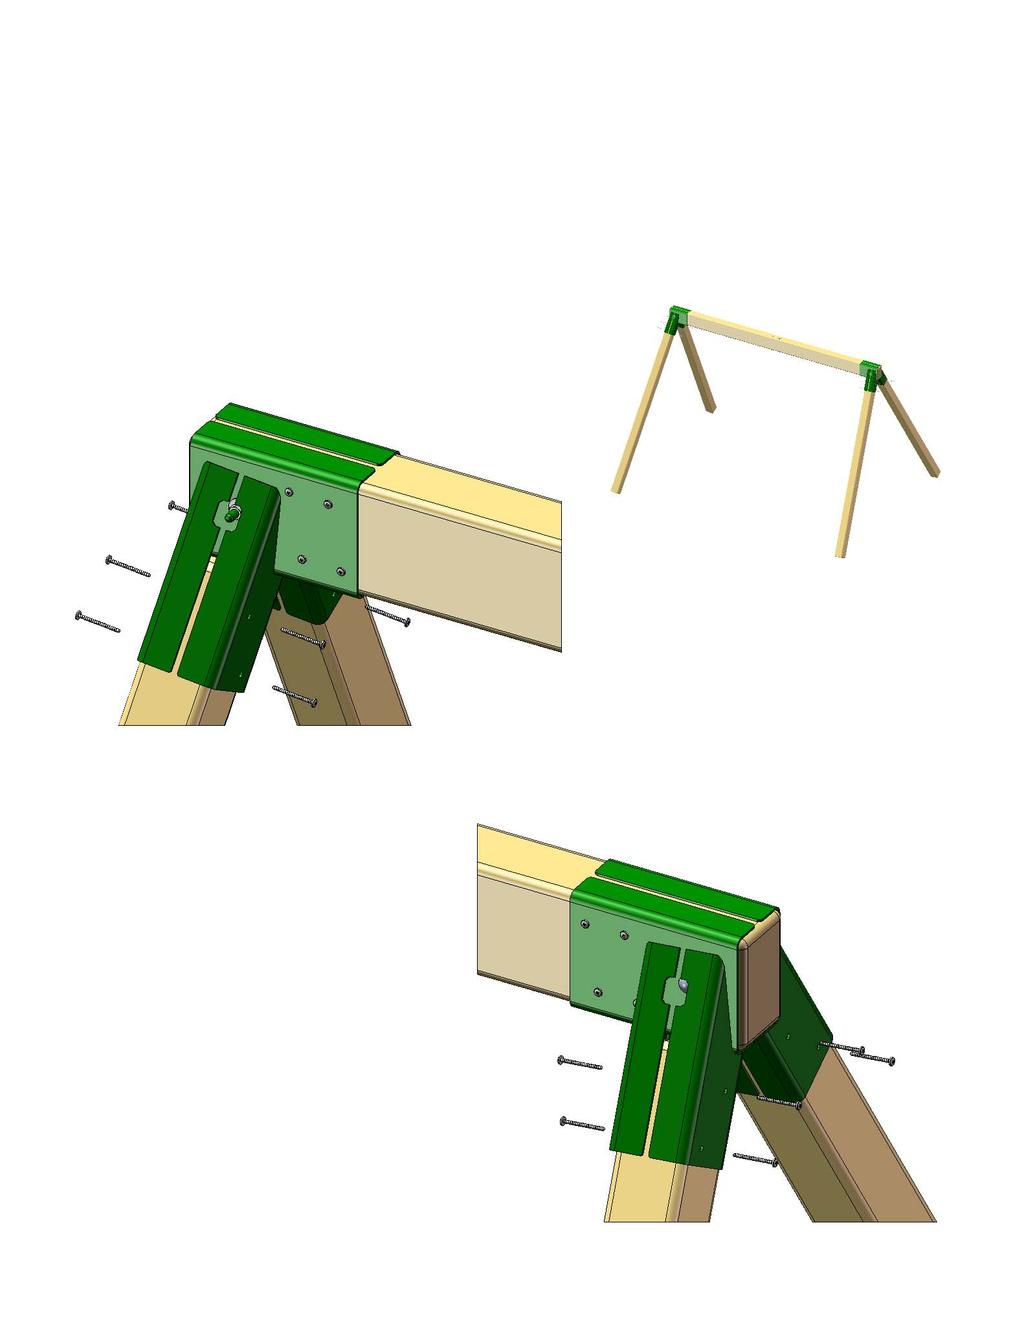 1: FIND THE FOUR 4 X 4 X 72" SWING LEGS. STEP 3: SWING LEGS 2: PLACE THE LEGS INSIDE THE SQUARE OPENING OF THE SWING LEG BRACKET AND ALLOW THE LEGS TO GO IN UNTIL THEY STOP.